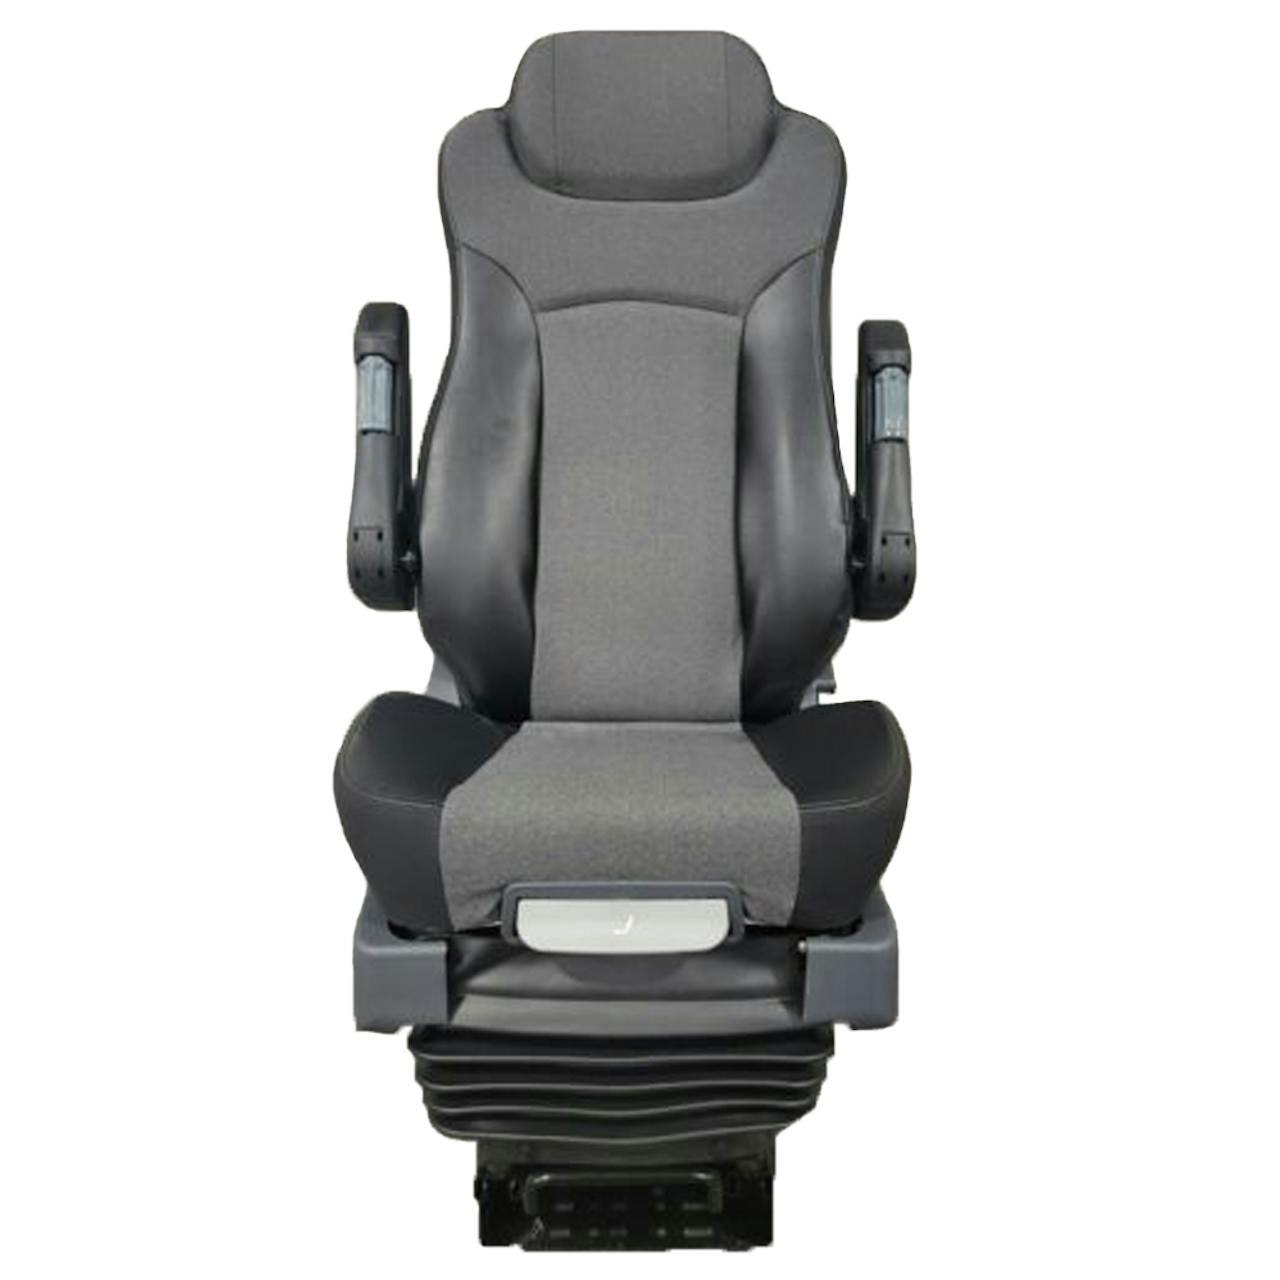 Black Semi Truck Seats, Cushions, Mounting and Accessories